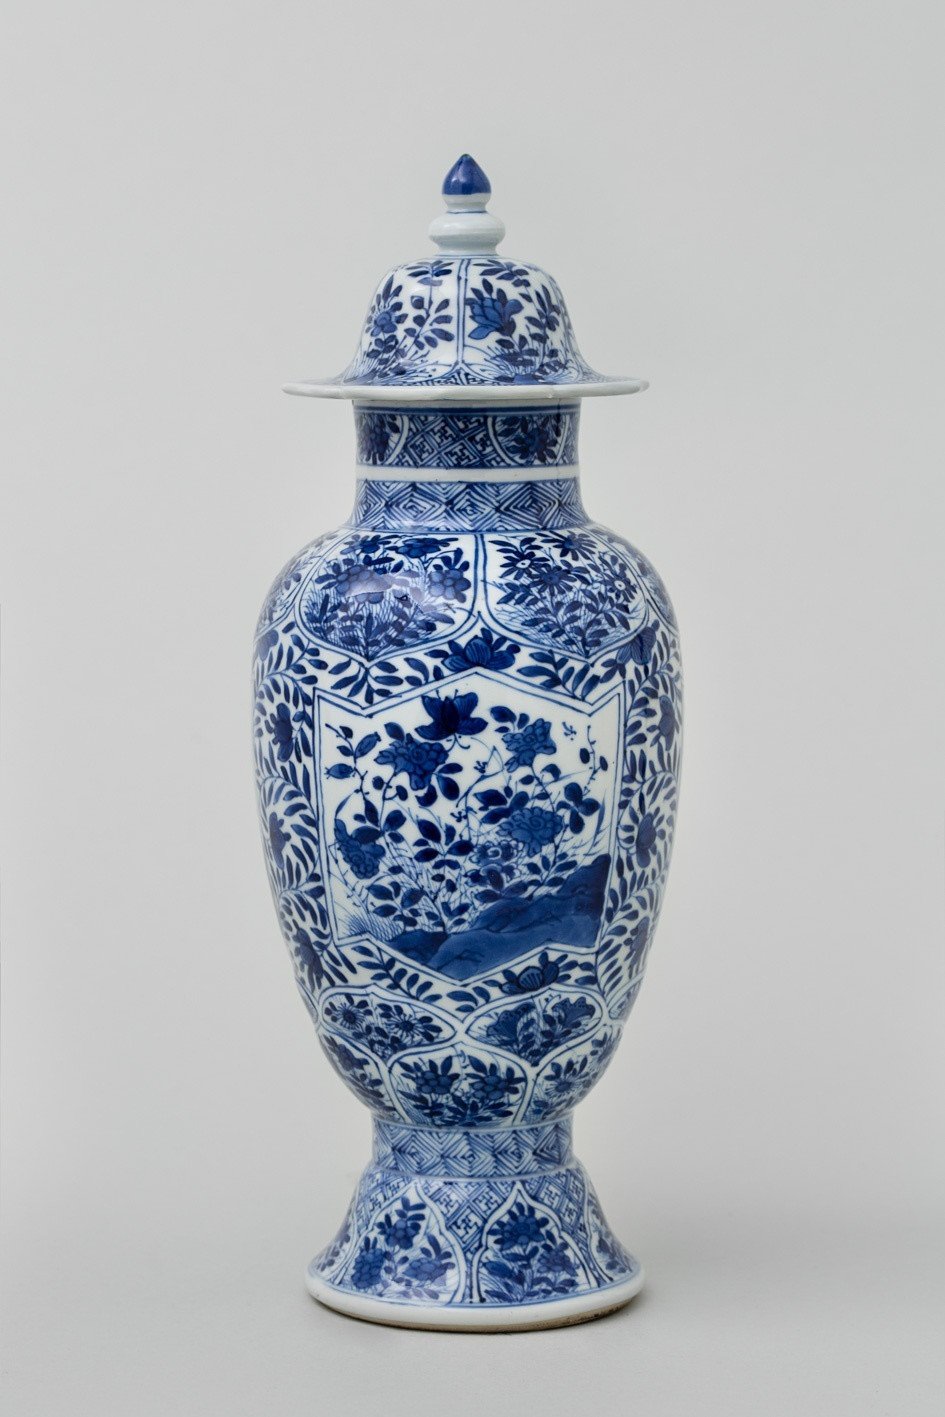 23 Fabulous Chinese Porcelain Vase 2023 free download chinese porcelain vase of a chinese blue and white baluster vase and cover kangxi 1662 172 inside a chinese blue and white baluster vase and cover